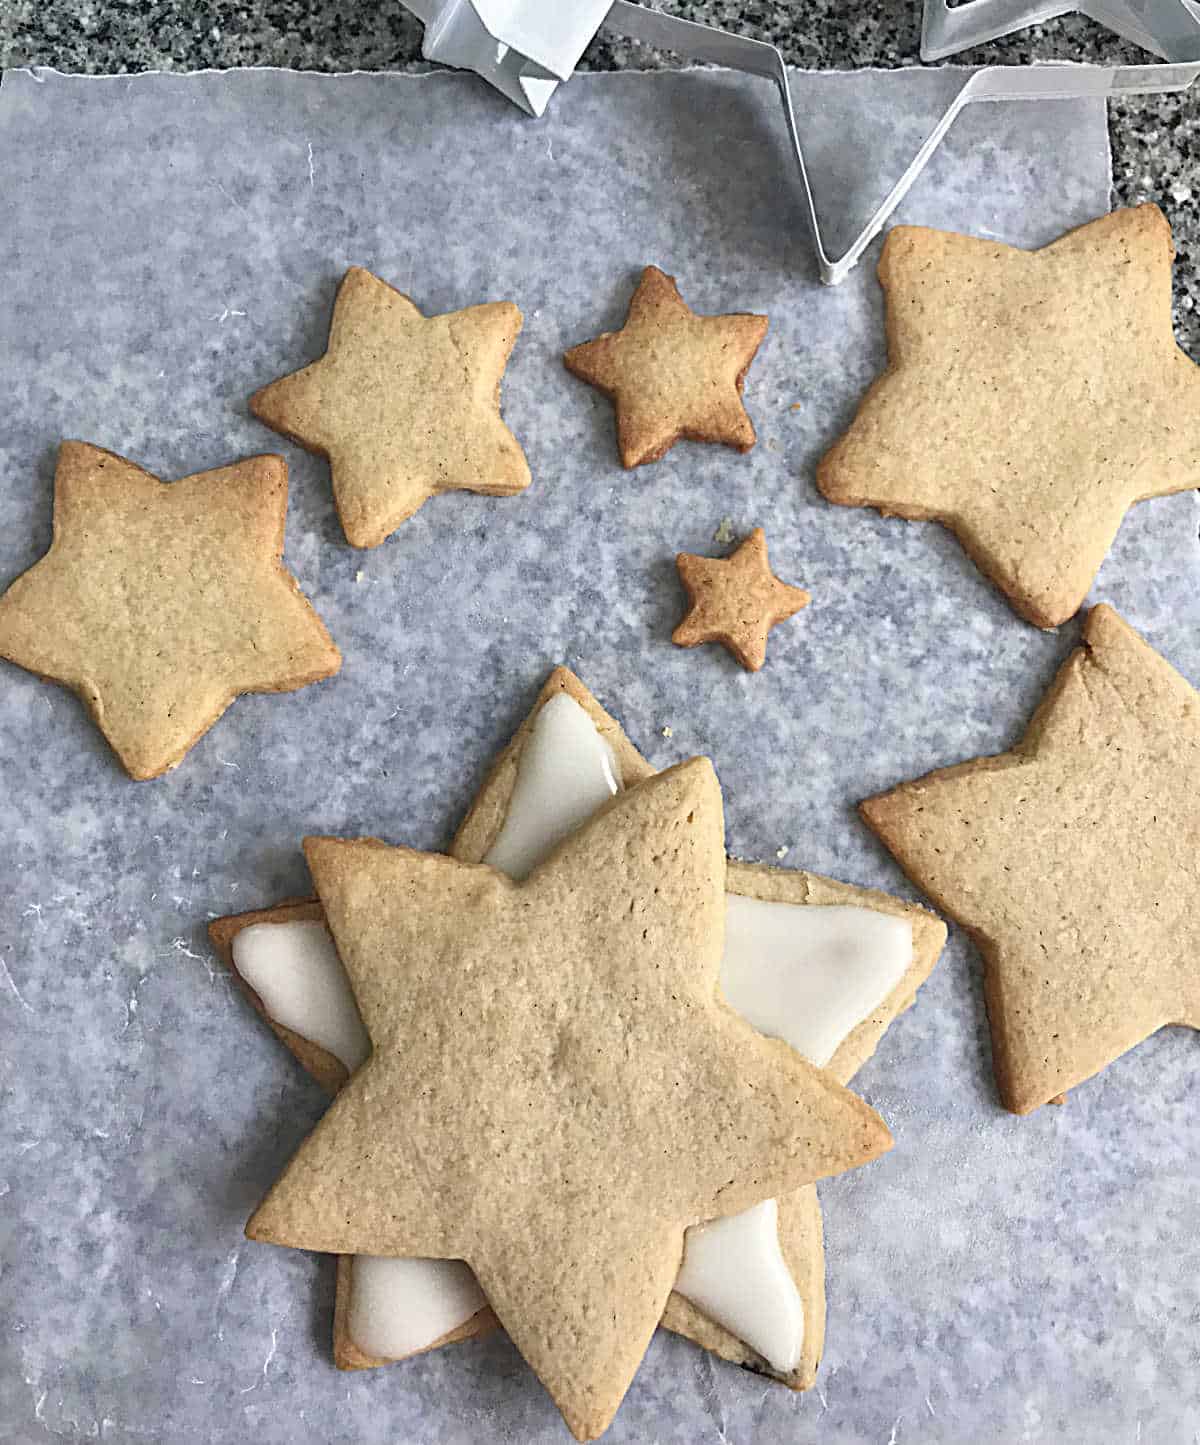 Several star shaped baked sugar cookies on whitish parchment paper